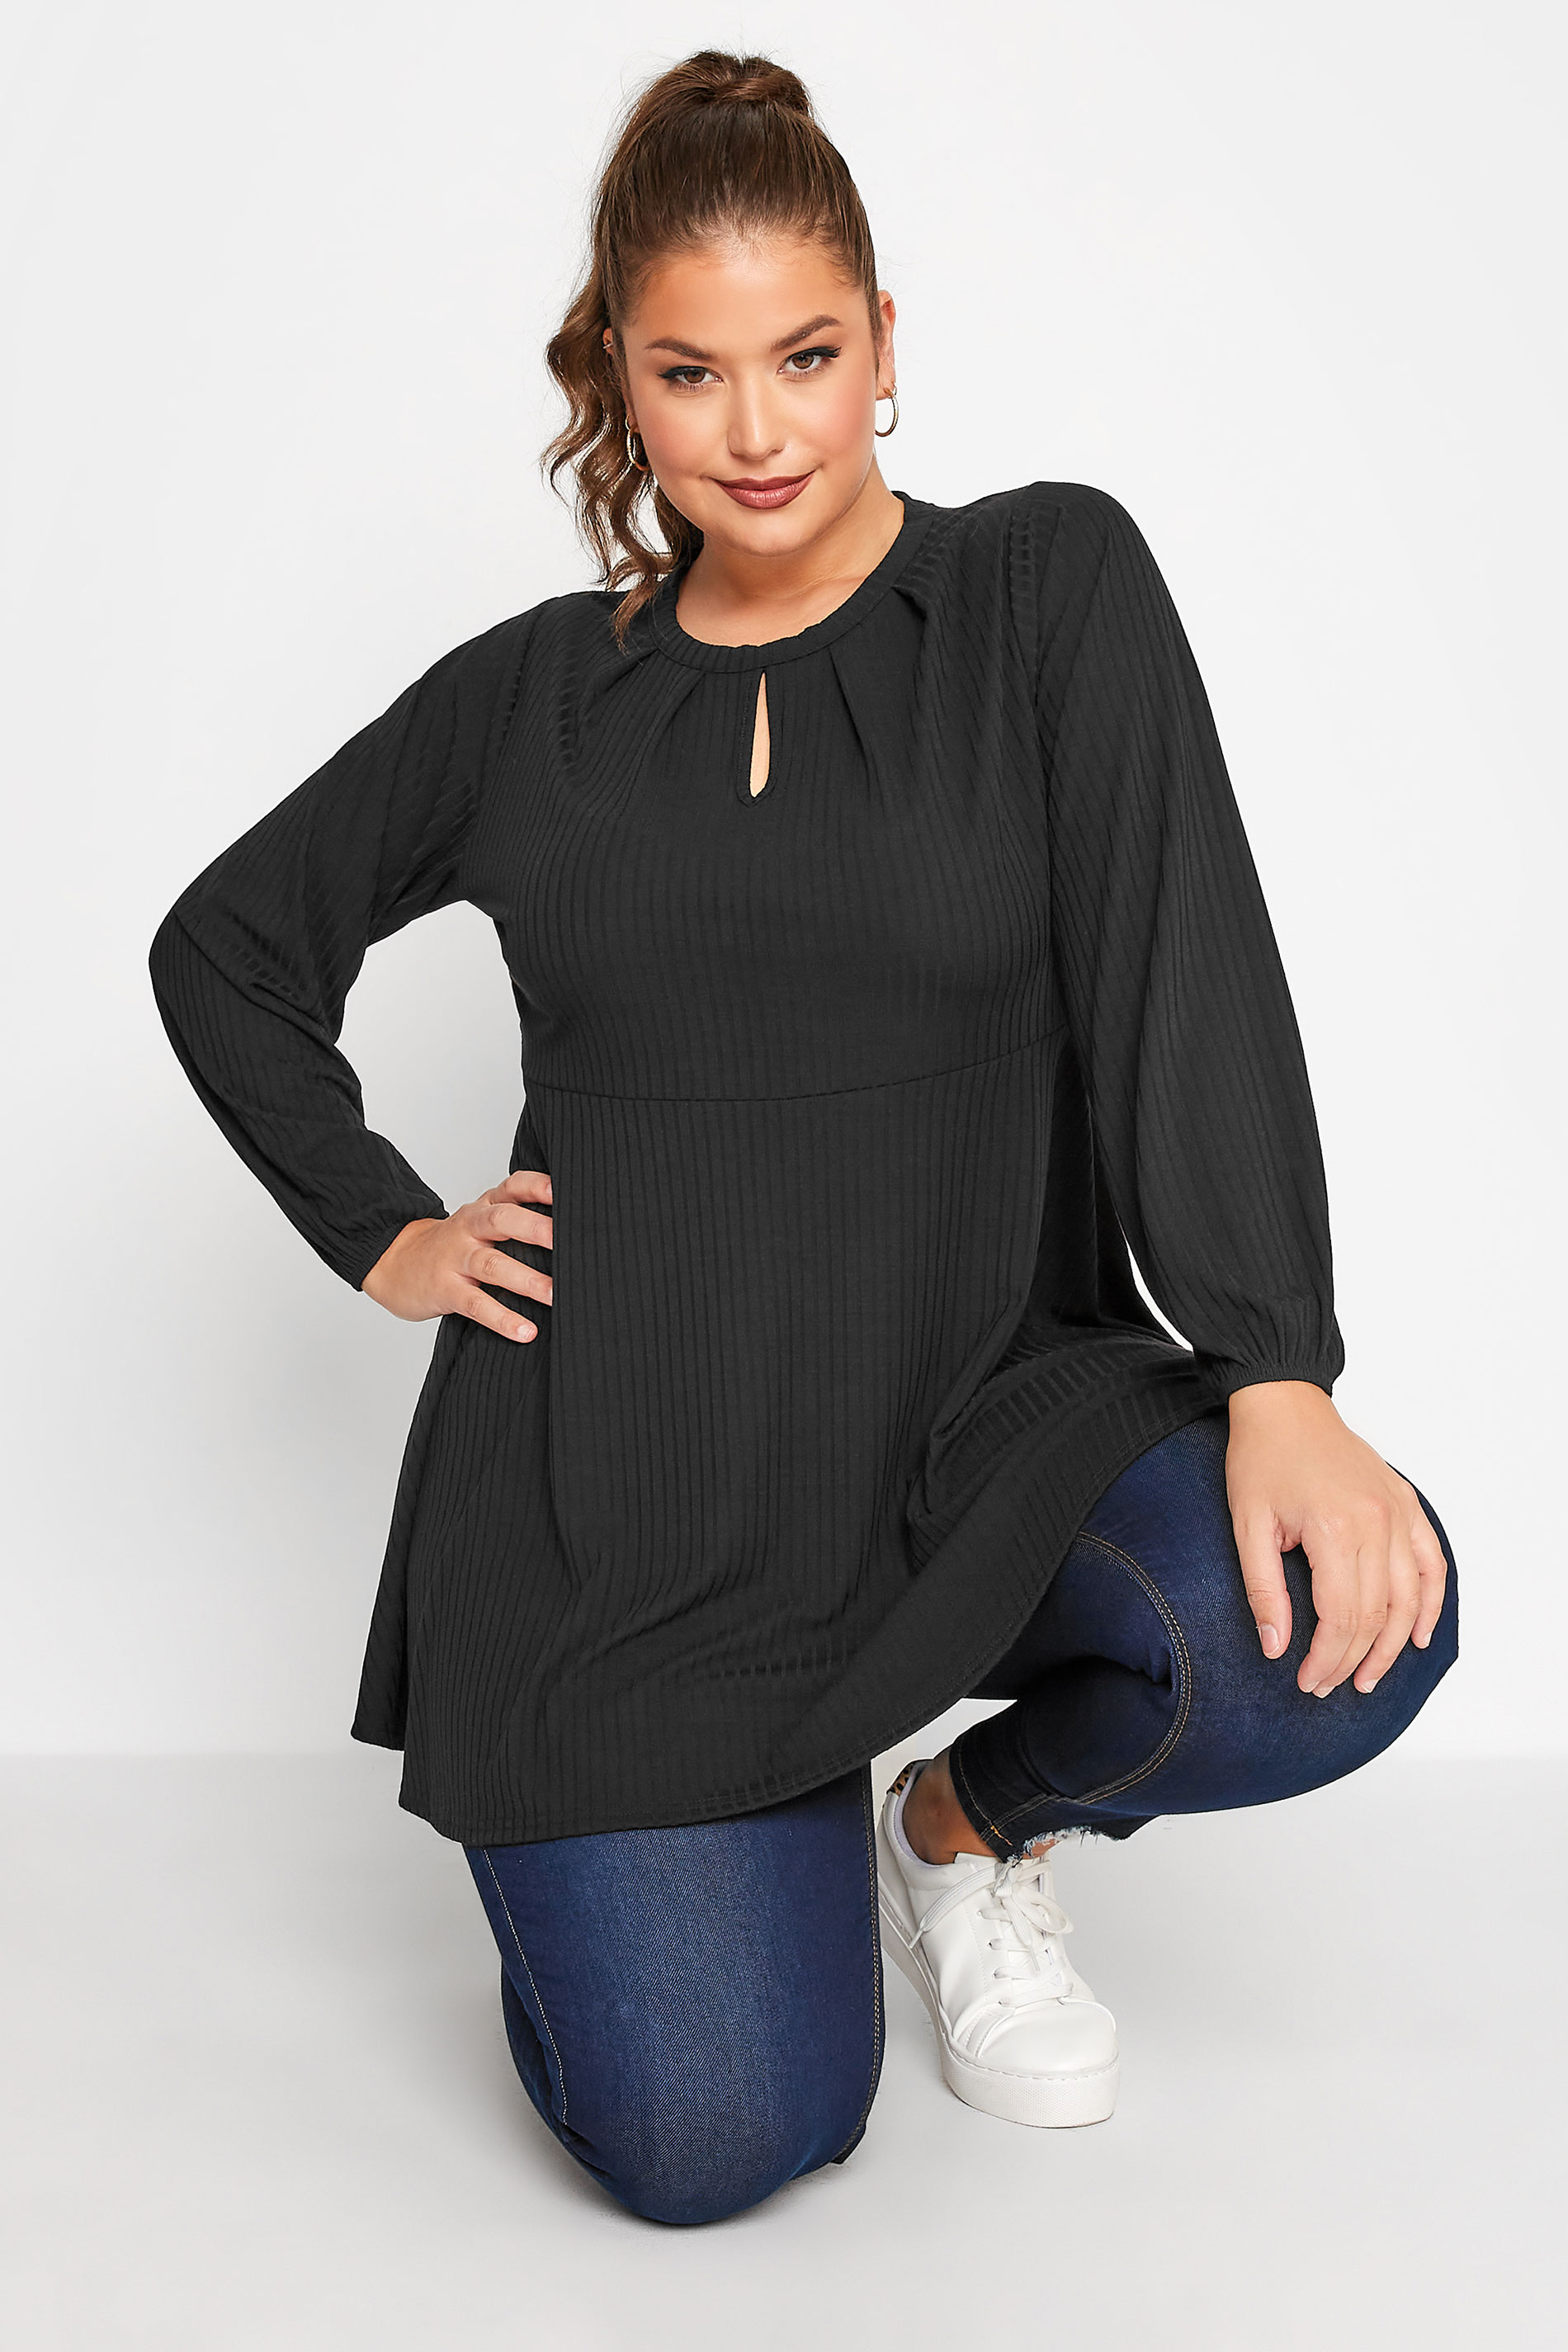 LIMITED COLLECTION Plus Size Black Peplum Keyhole Top | Yours Clothing  1